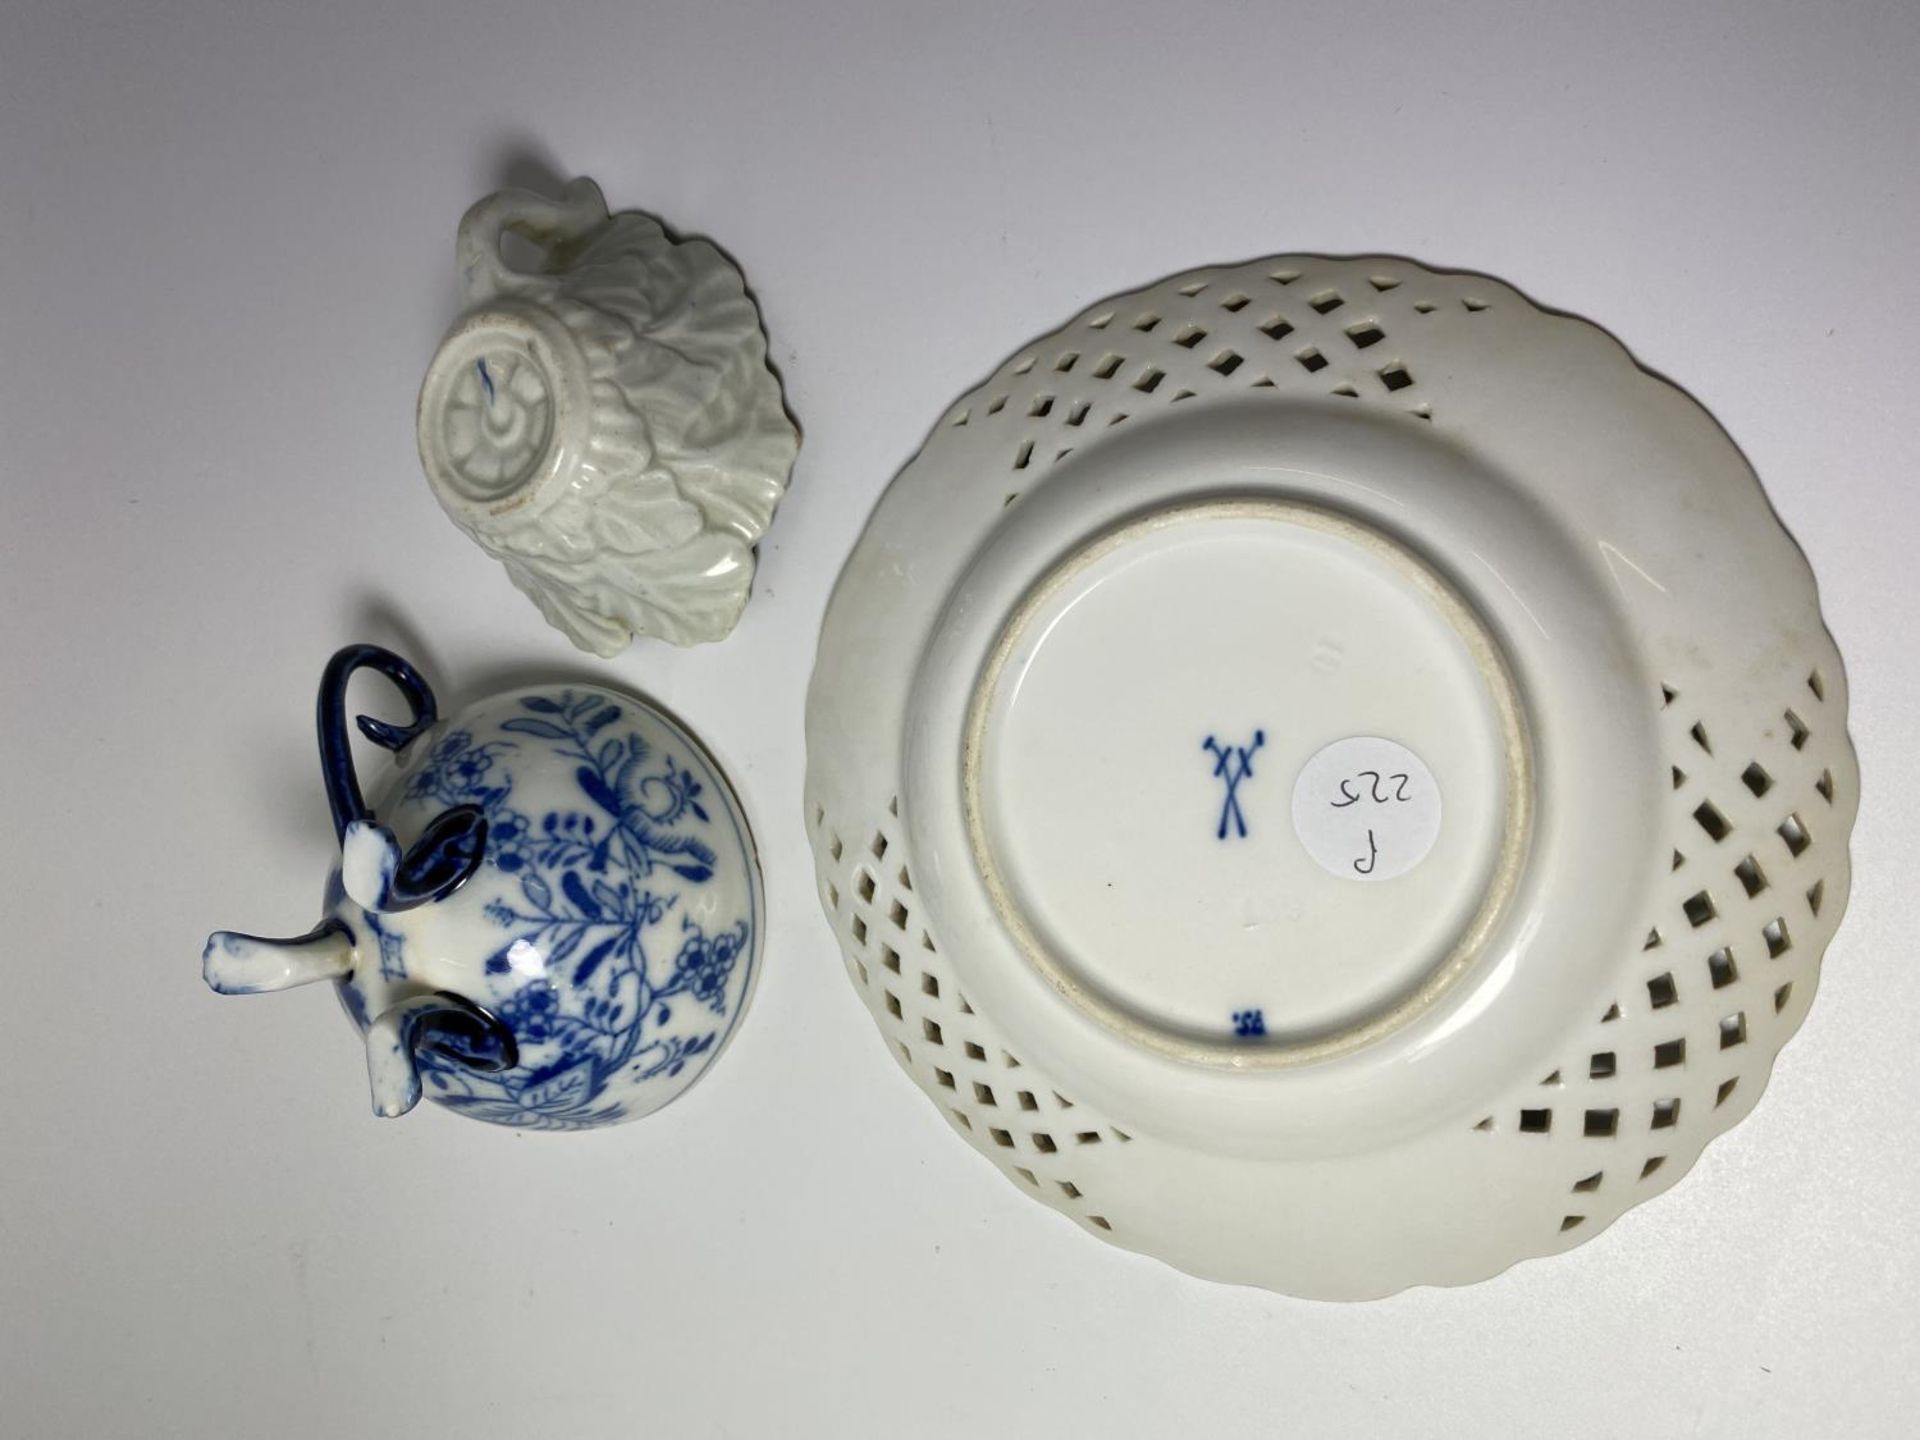 THREE 19TH CENTURY CERAMIC ITEMS - DISH WITH MEISSEN CROSS SWORDS MARK, SMALL CHELSEA STYLE - Image 2 of 3